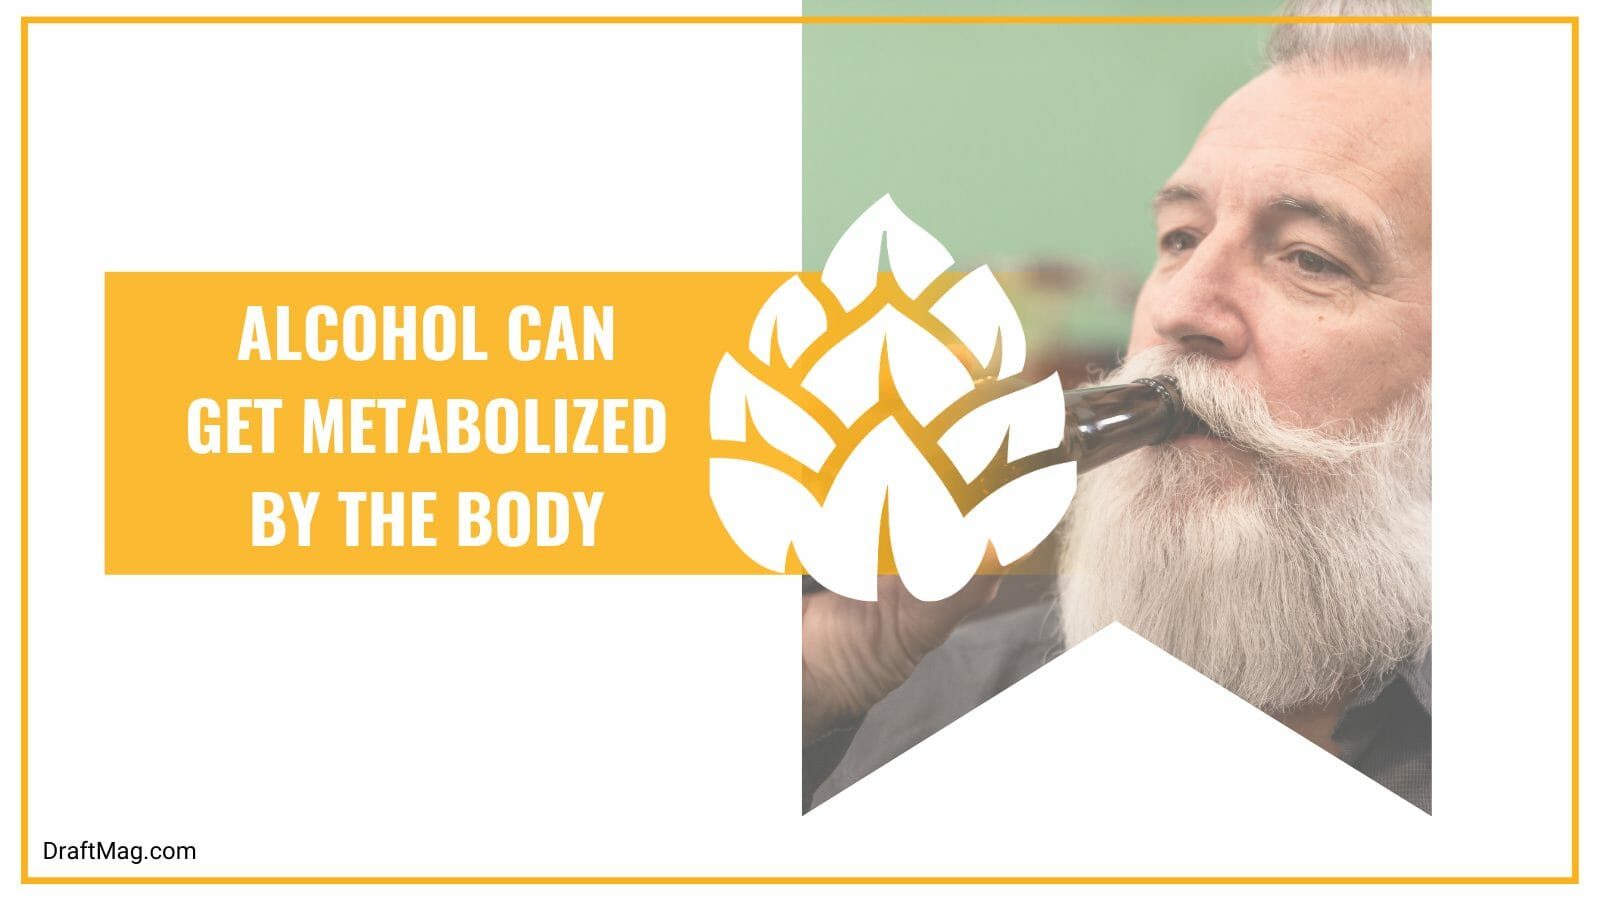 The body can metabolize alcohol